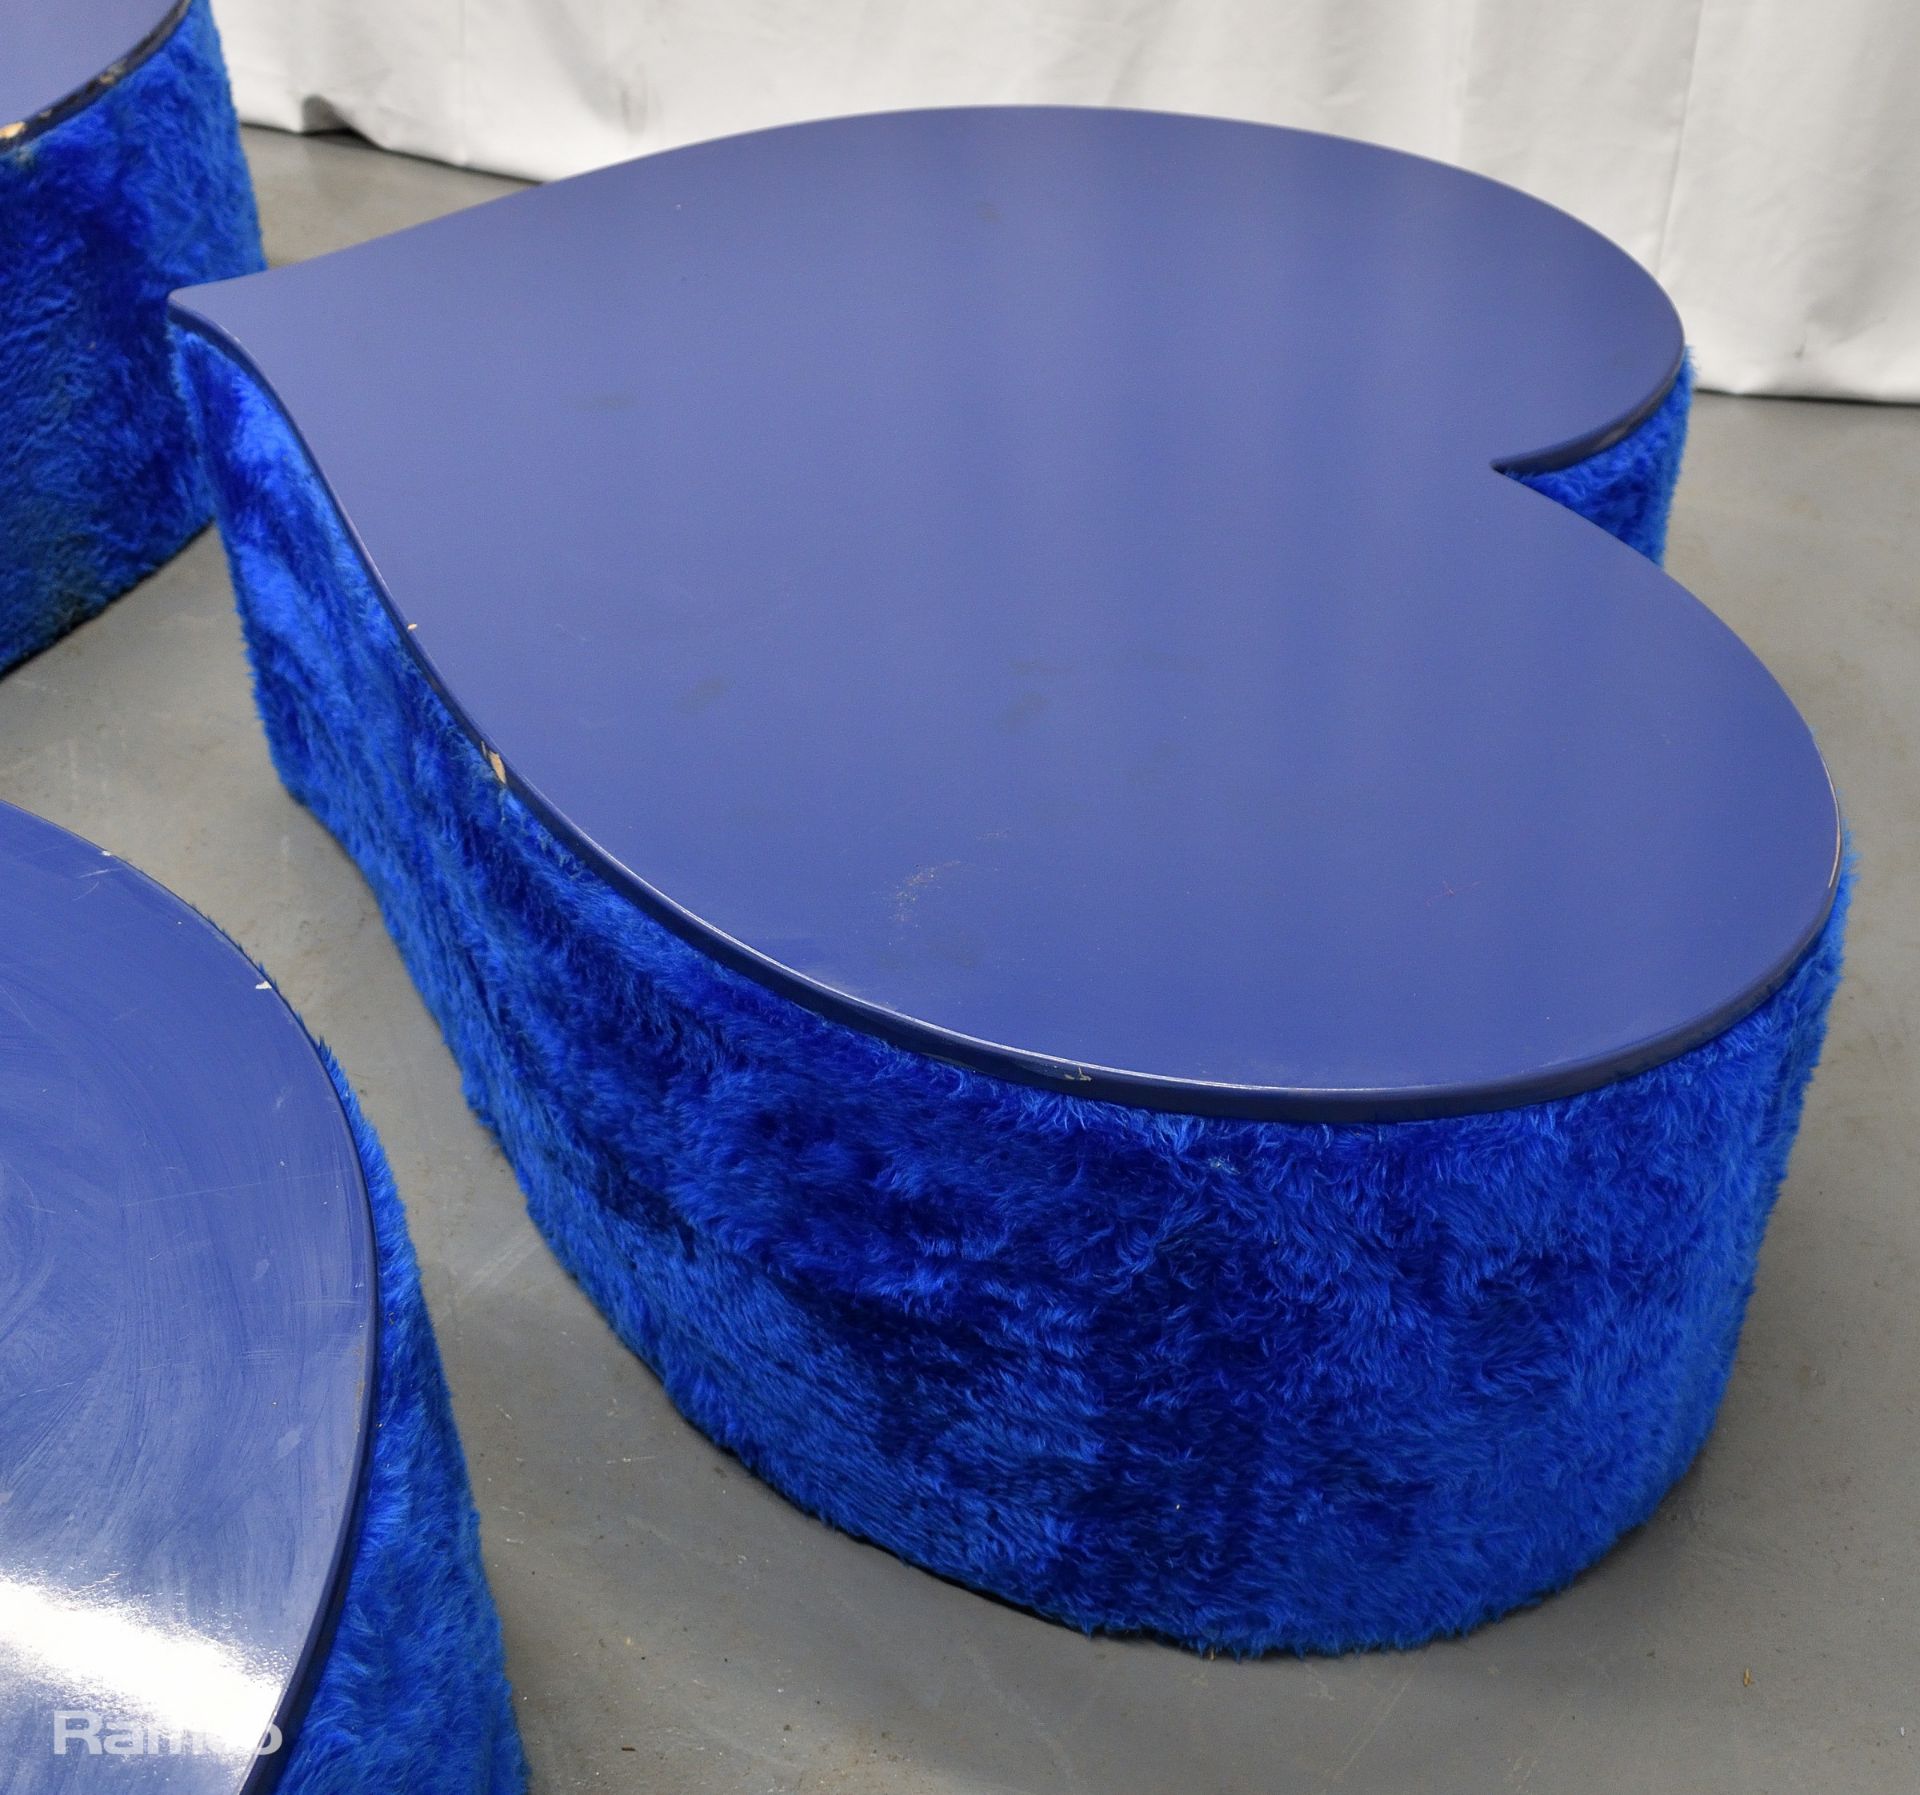 3x Asymmetrical heart shaped blue fur-covered wooden tables from countries' seating area - Image 8 of 13